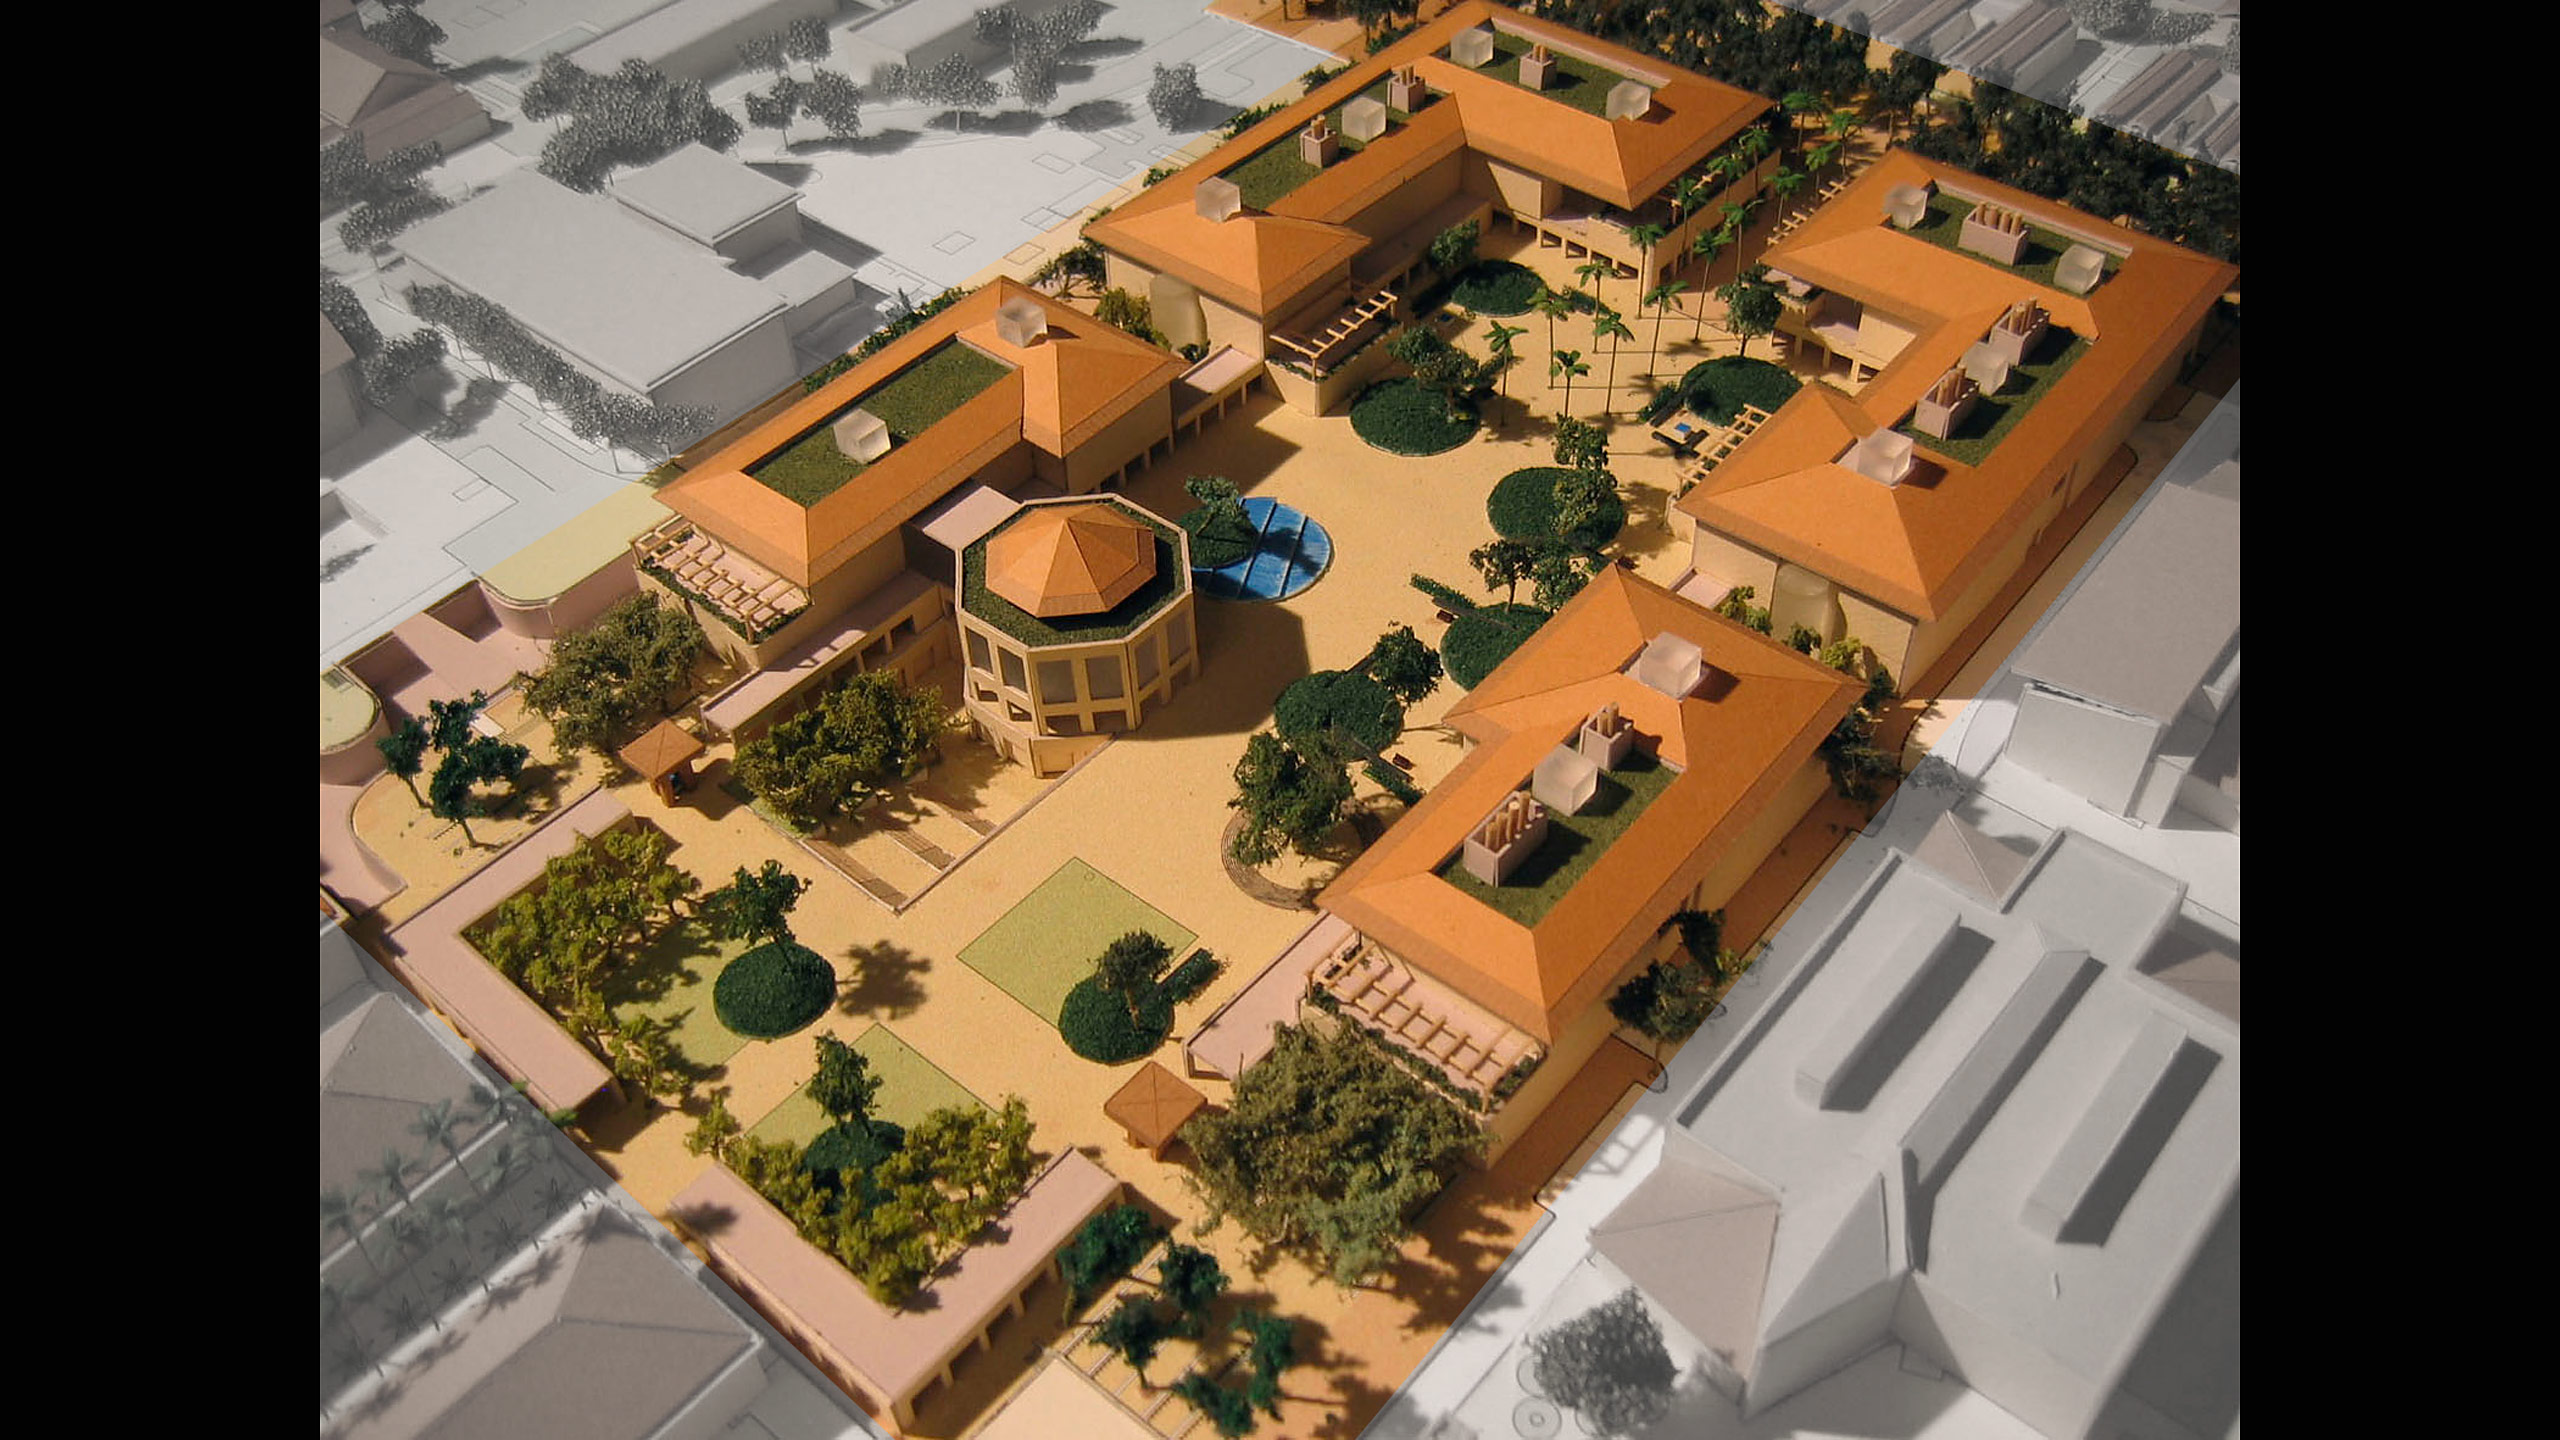 Science and Engineering Quad Master Plan and Design Guidelines at Stanford University / image 1